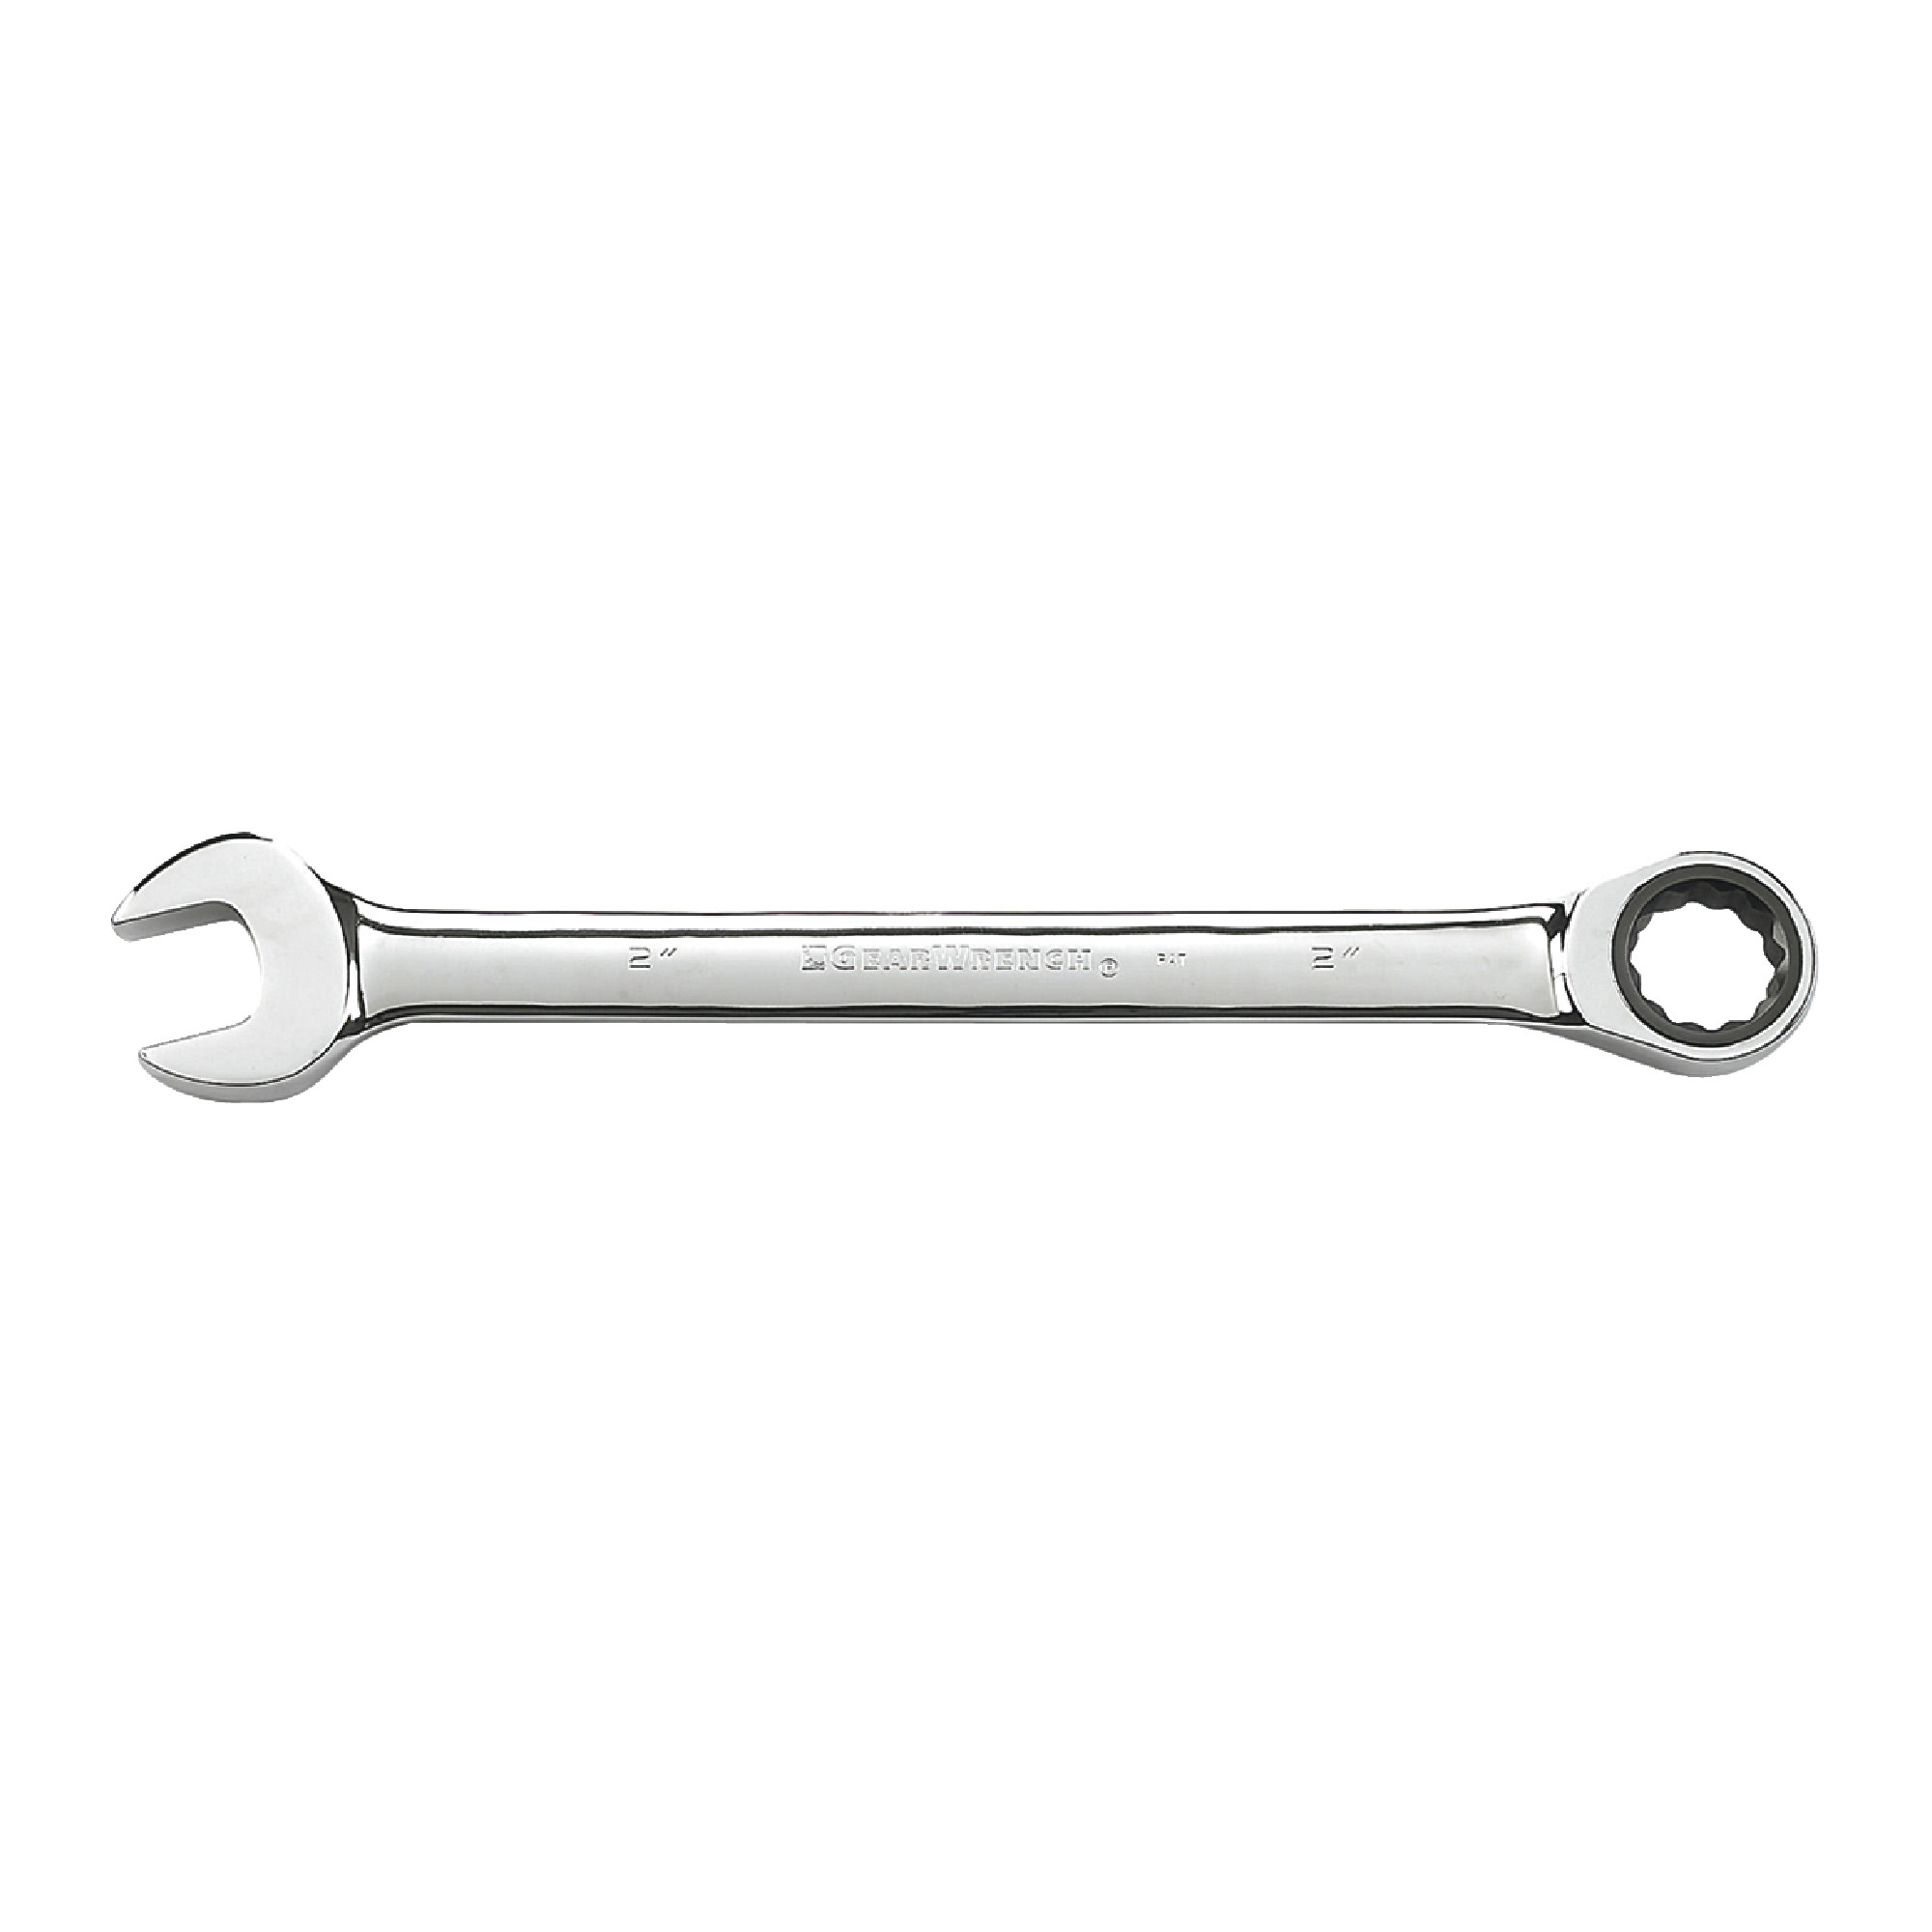 15/16" 12 Point Ratcheting Combination Wrench